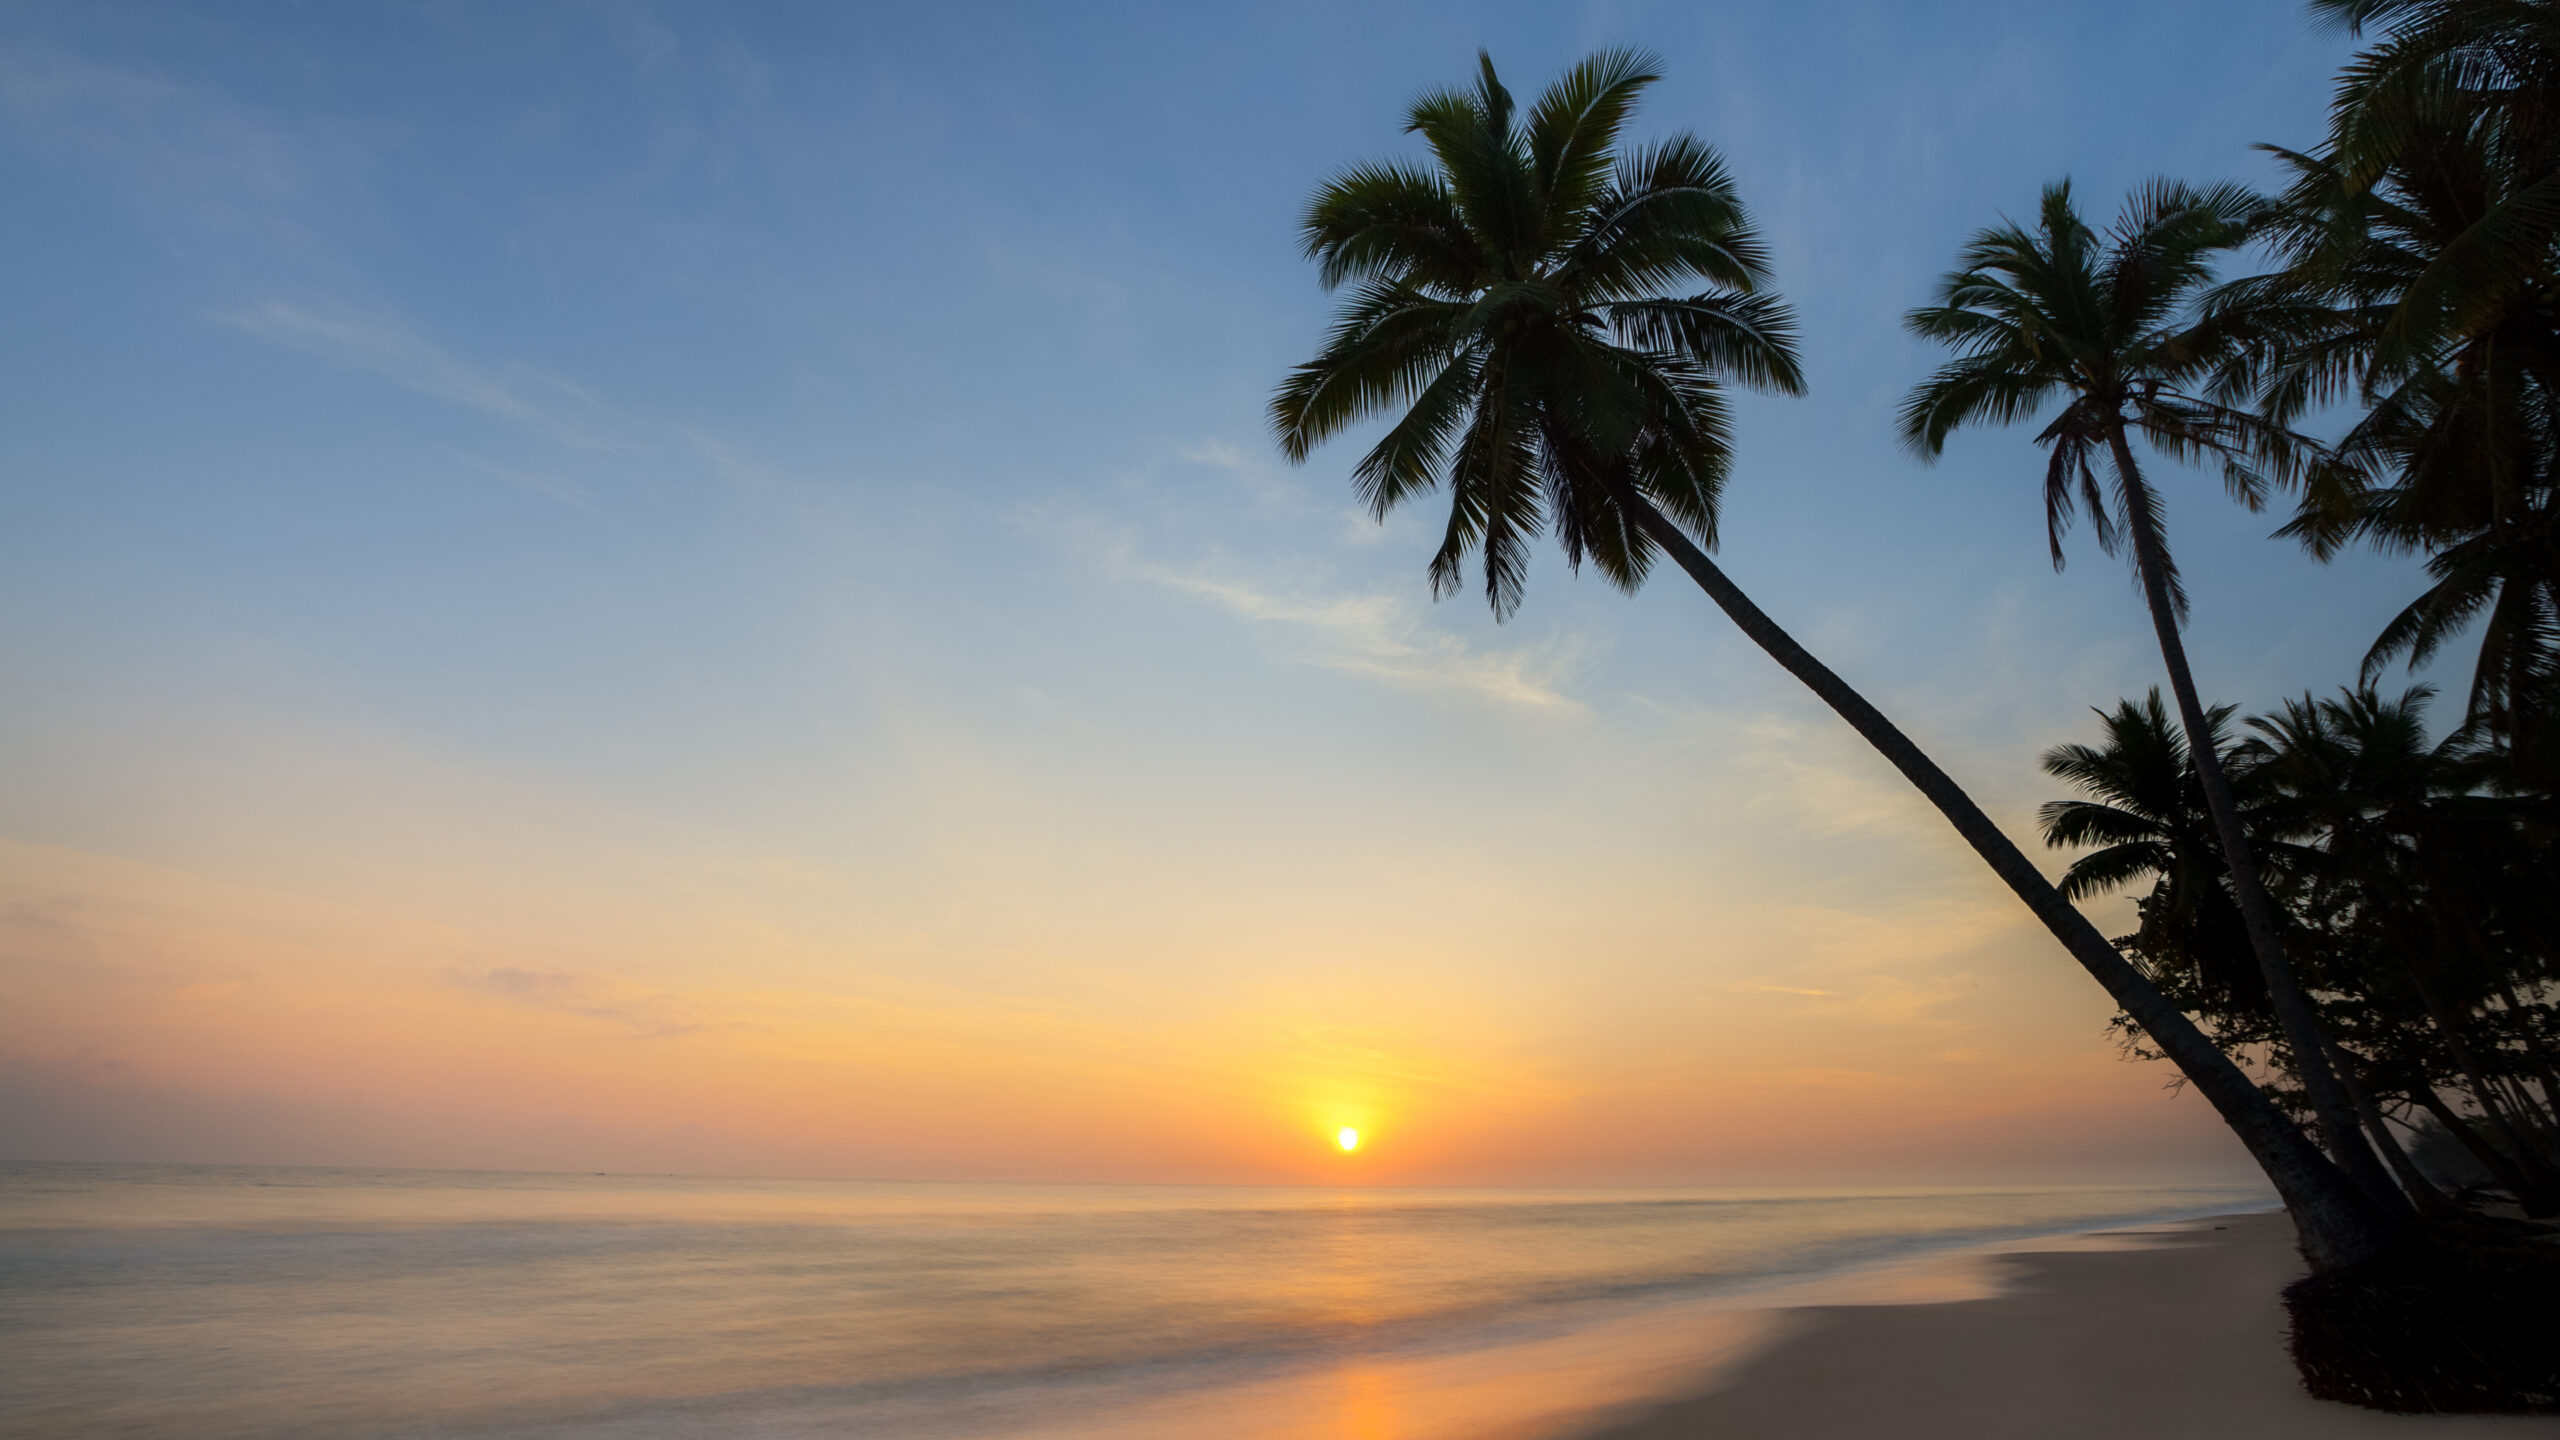 Palm Trees On Beach Sand And Beautiful Ocean Waves Under Blue Sky During Sunset K K 2K Nature